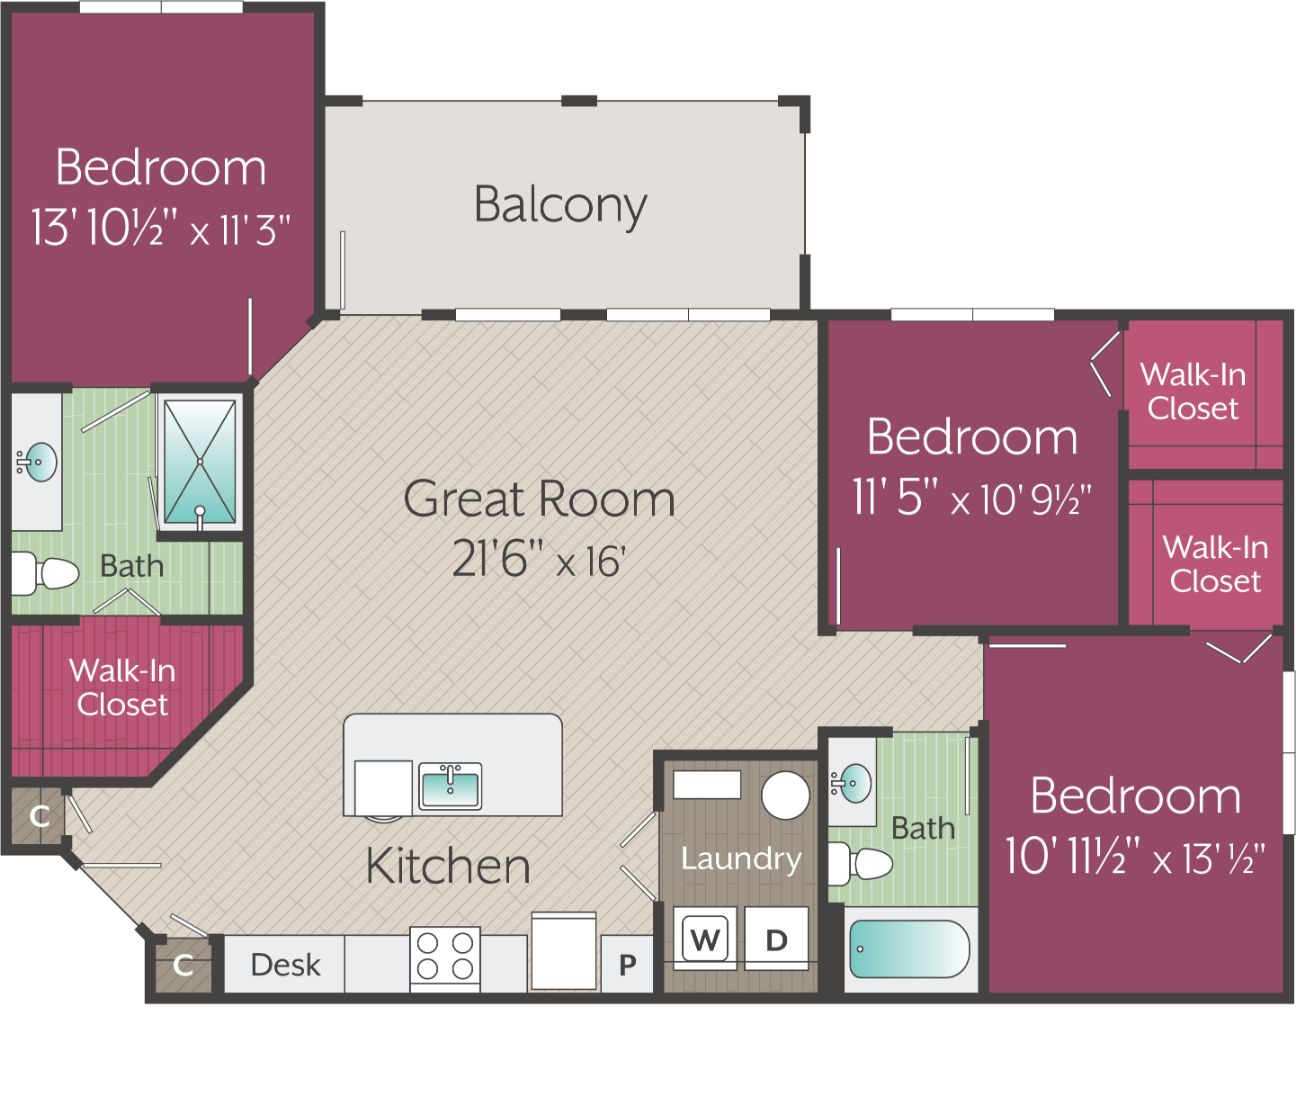 A floor plan of an apartment with two bedrooms and two bathrooms.